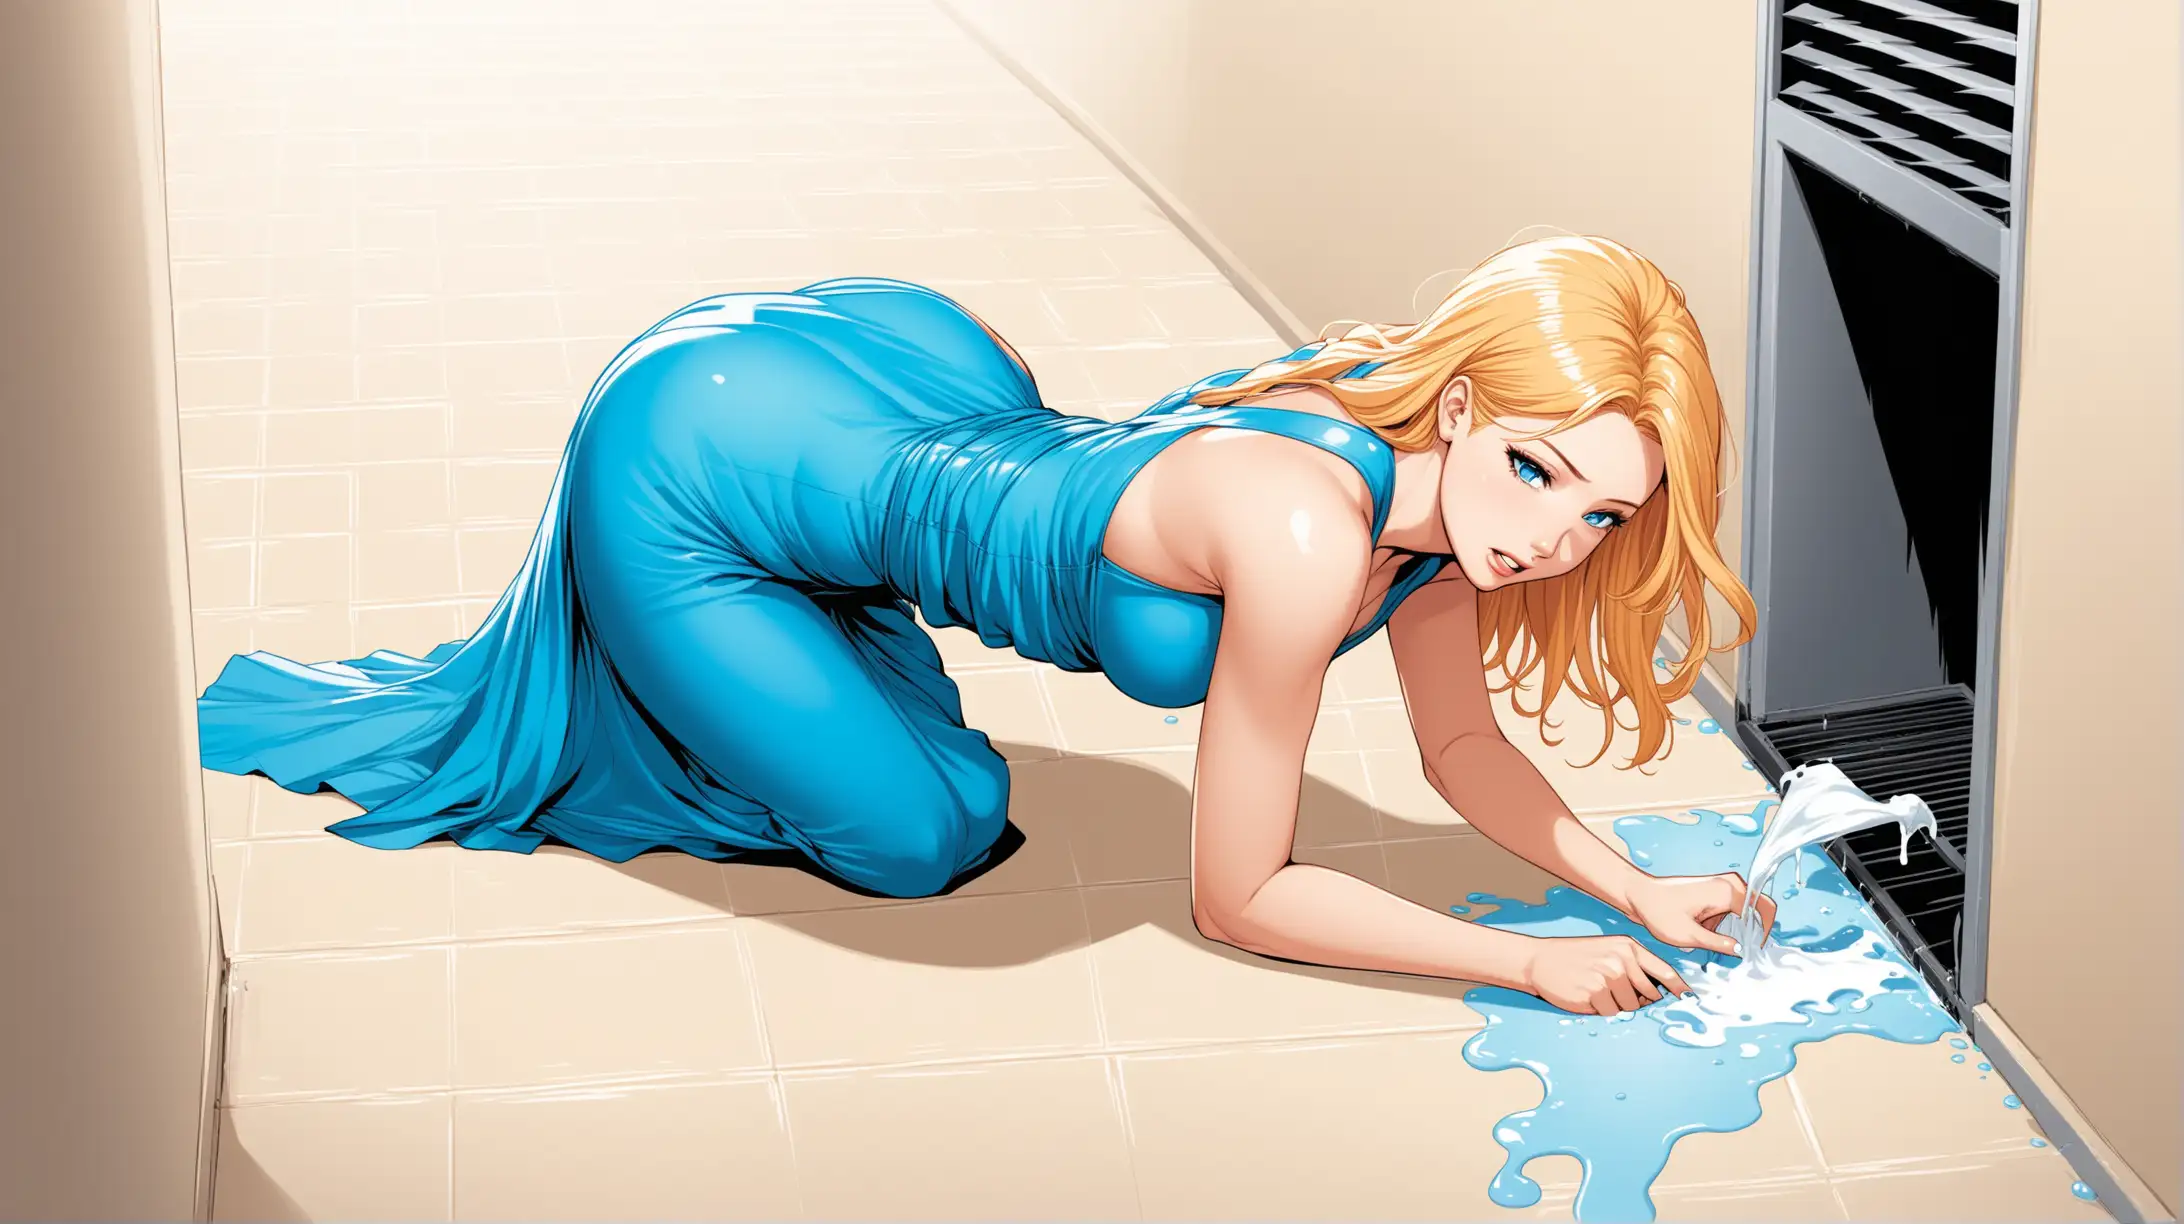 Seductive Woman in Blue Dress with Crawling Bleach on Rectangular Floor Vent